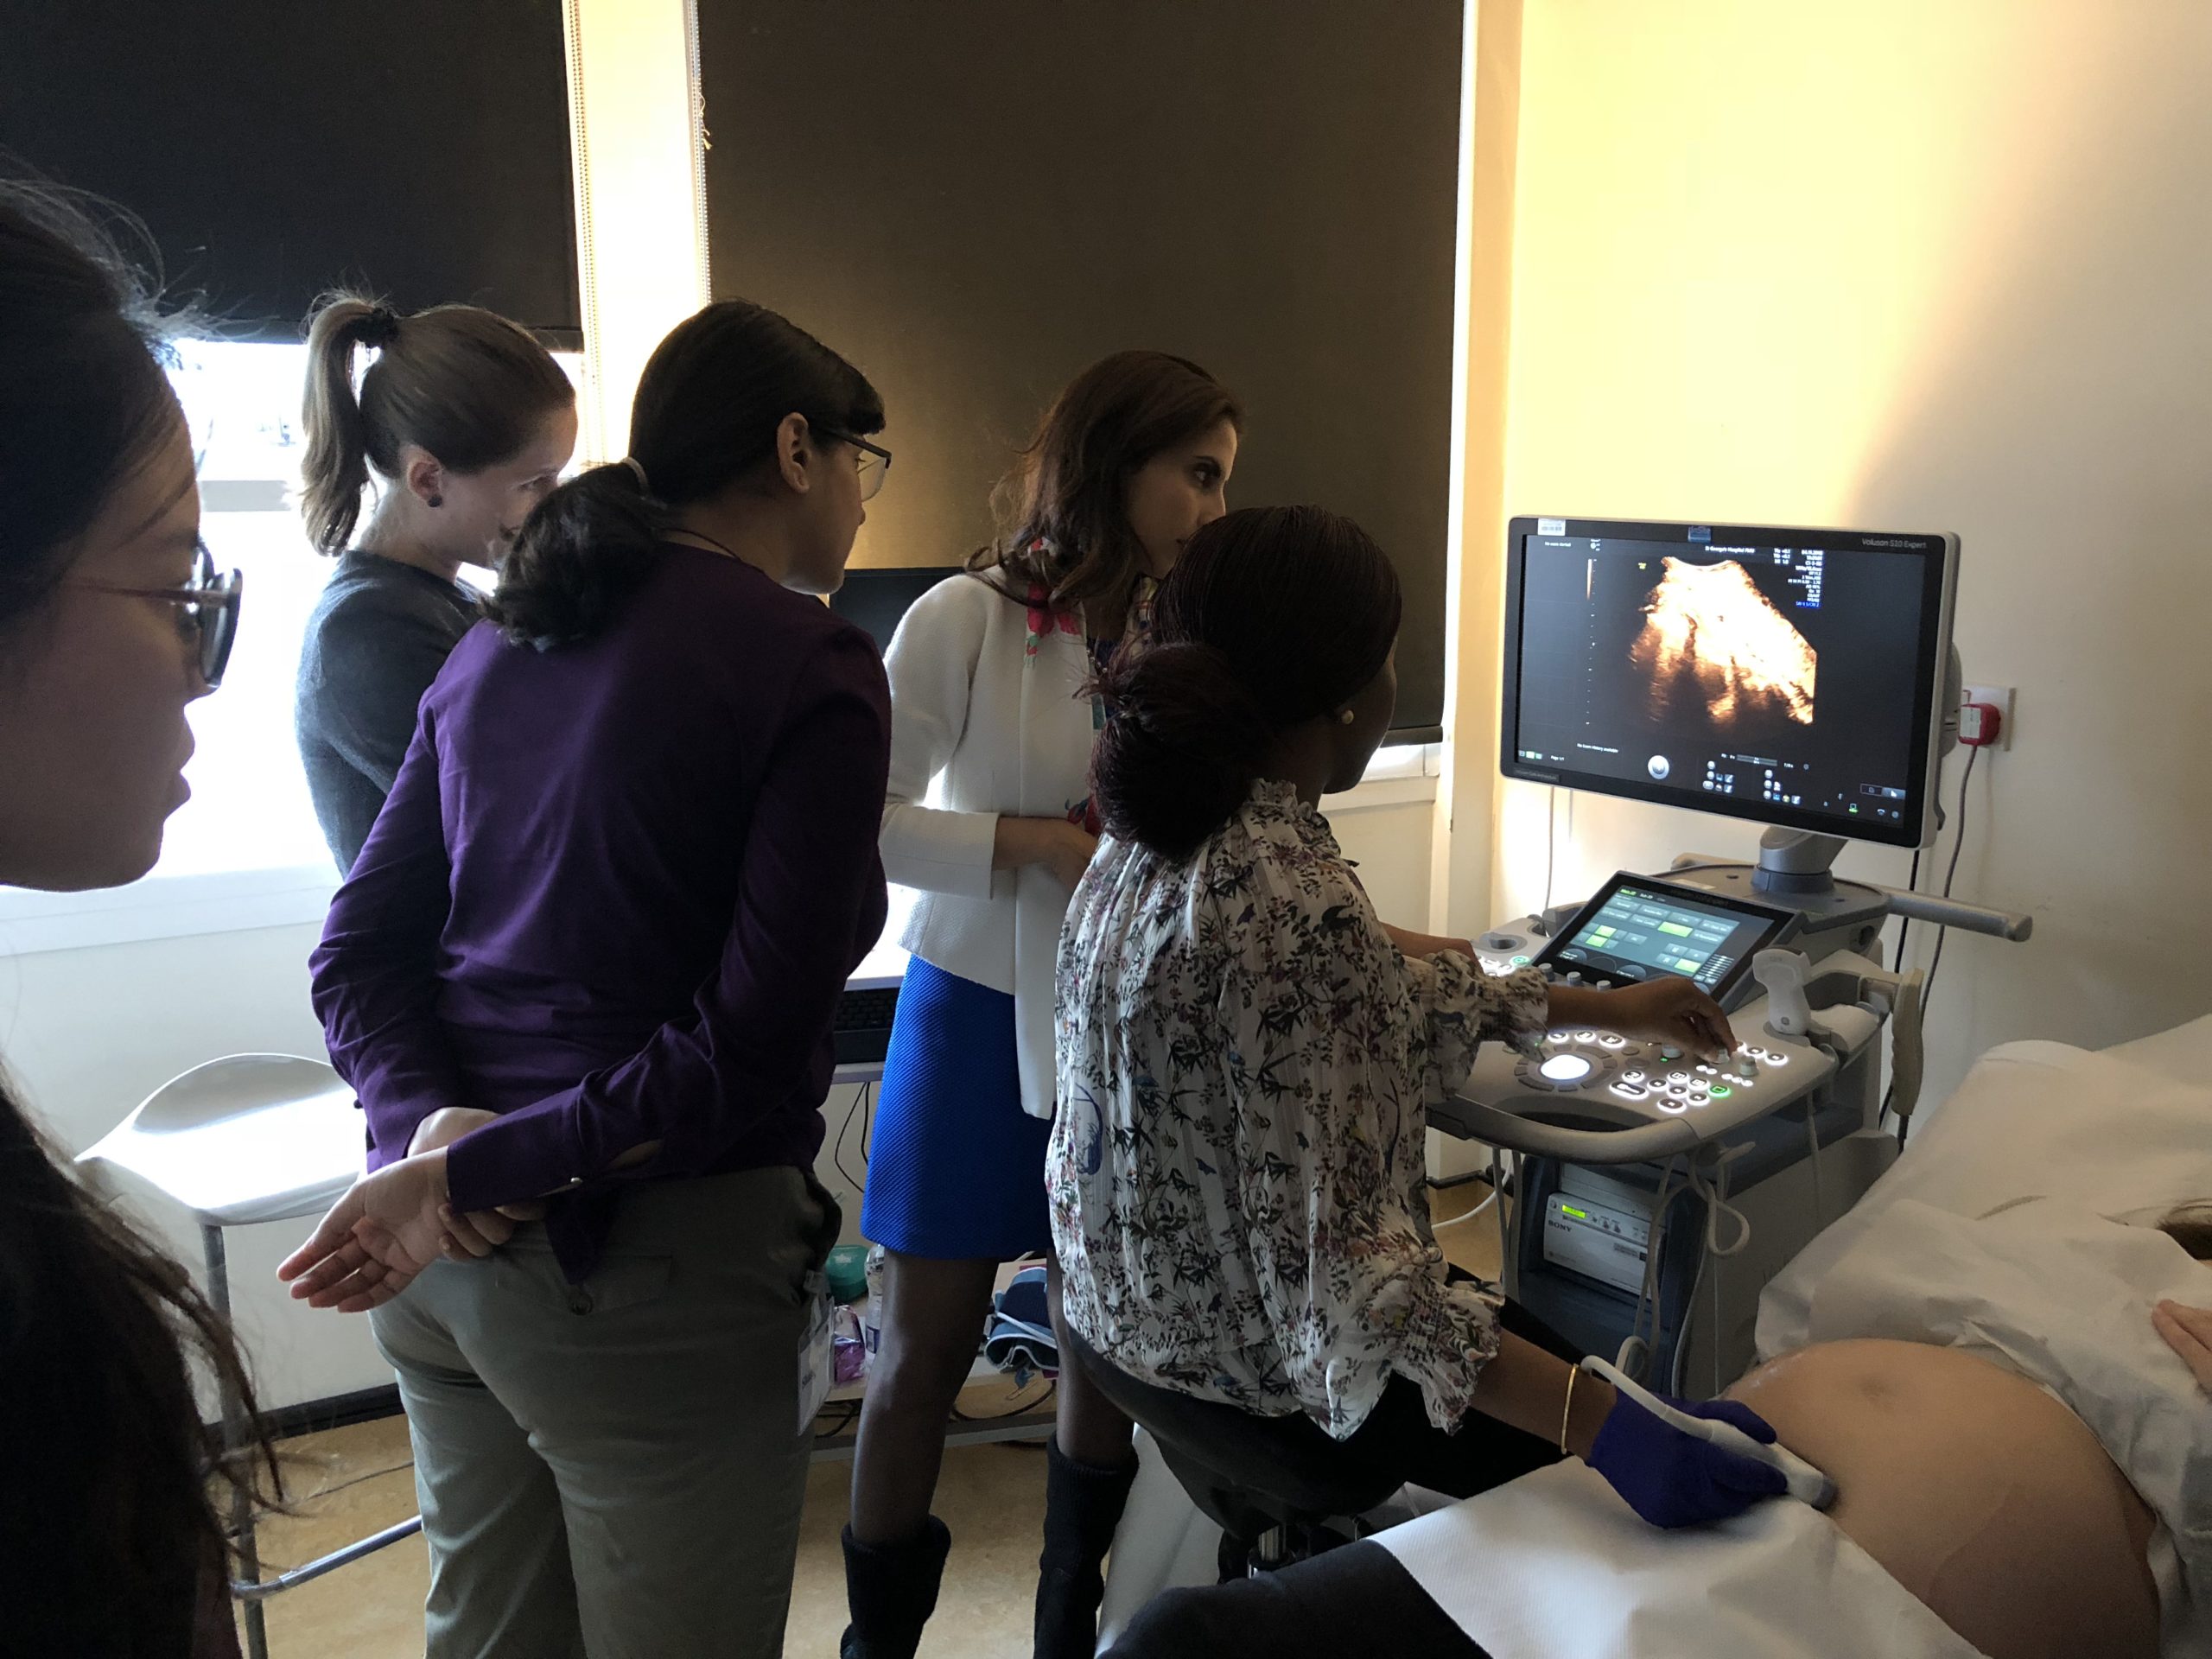 post secondary education for ultrasound